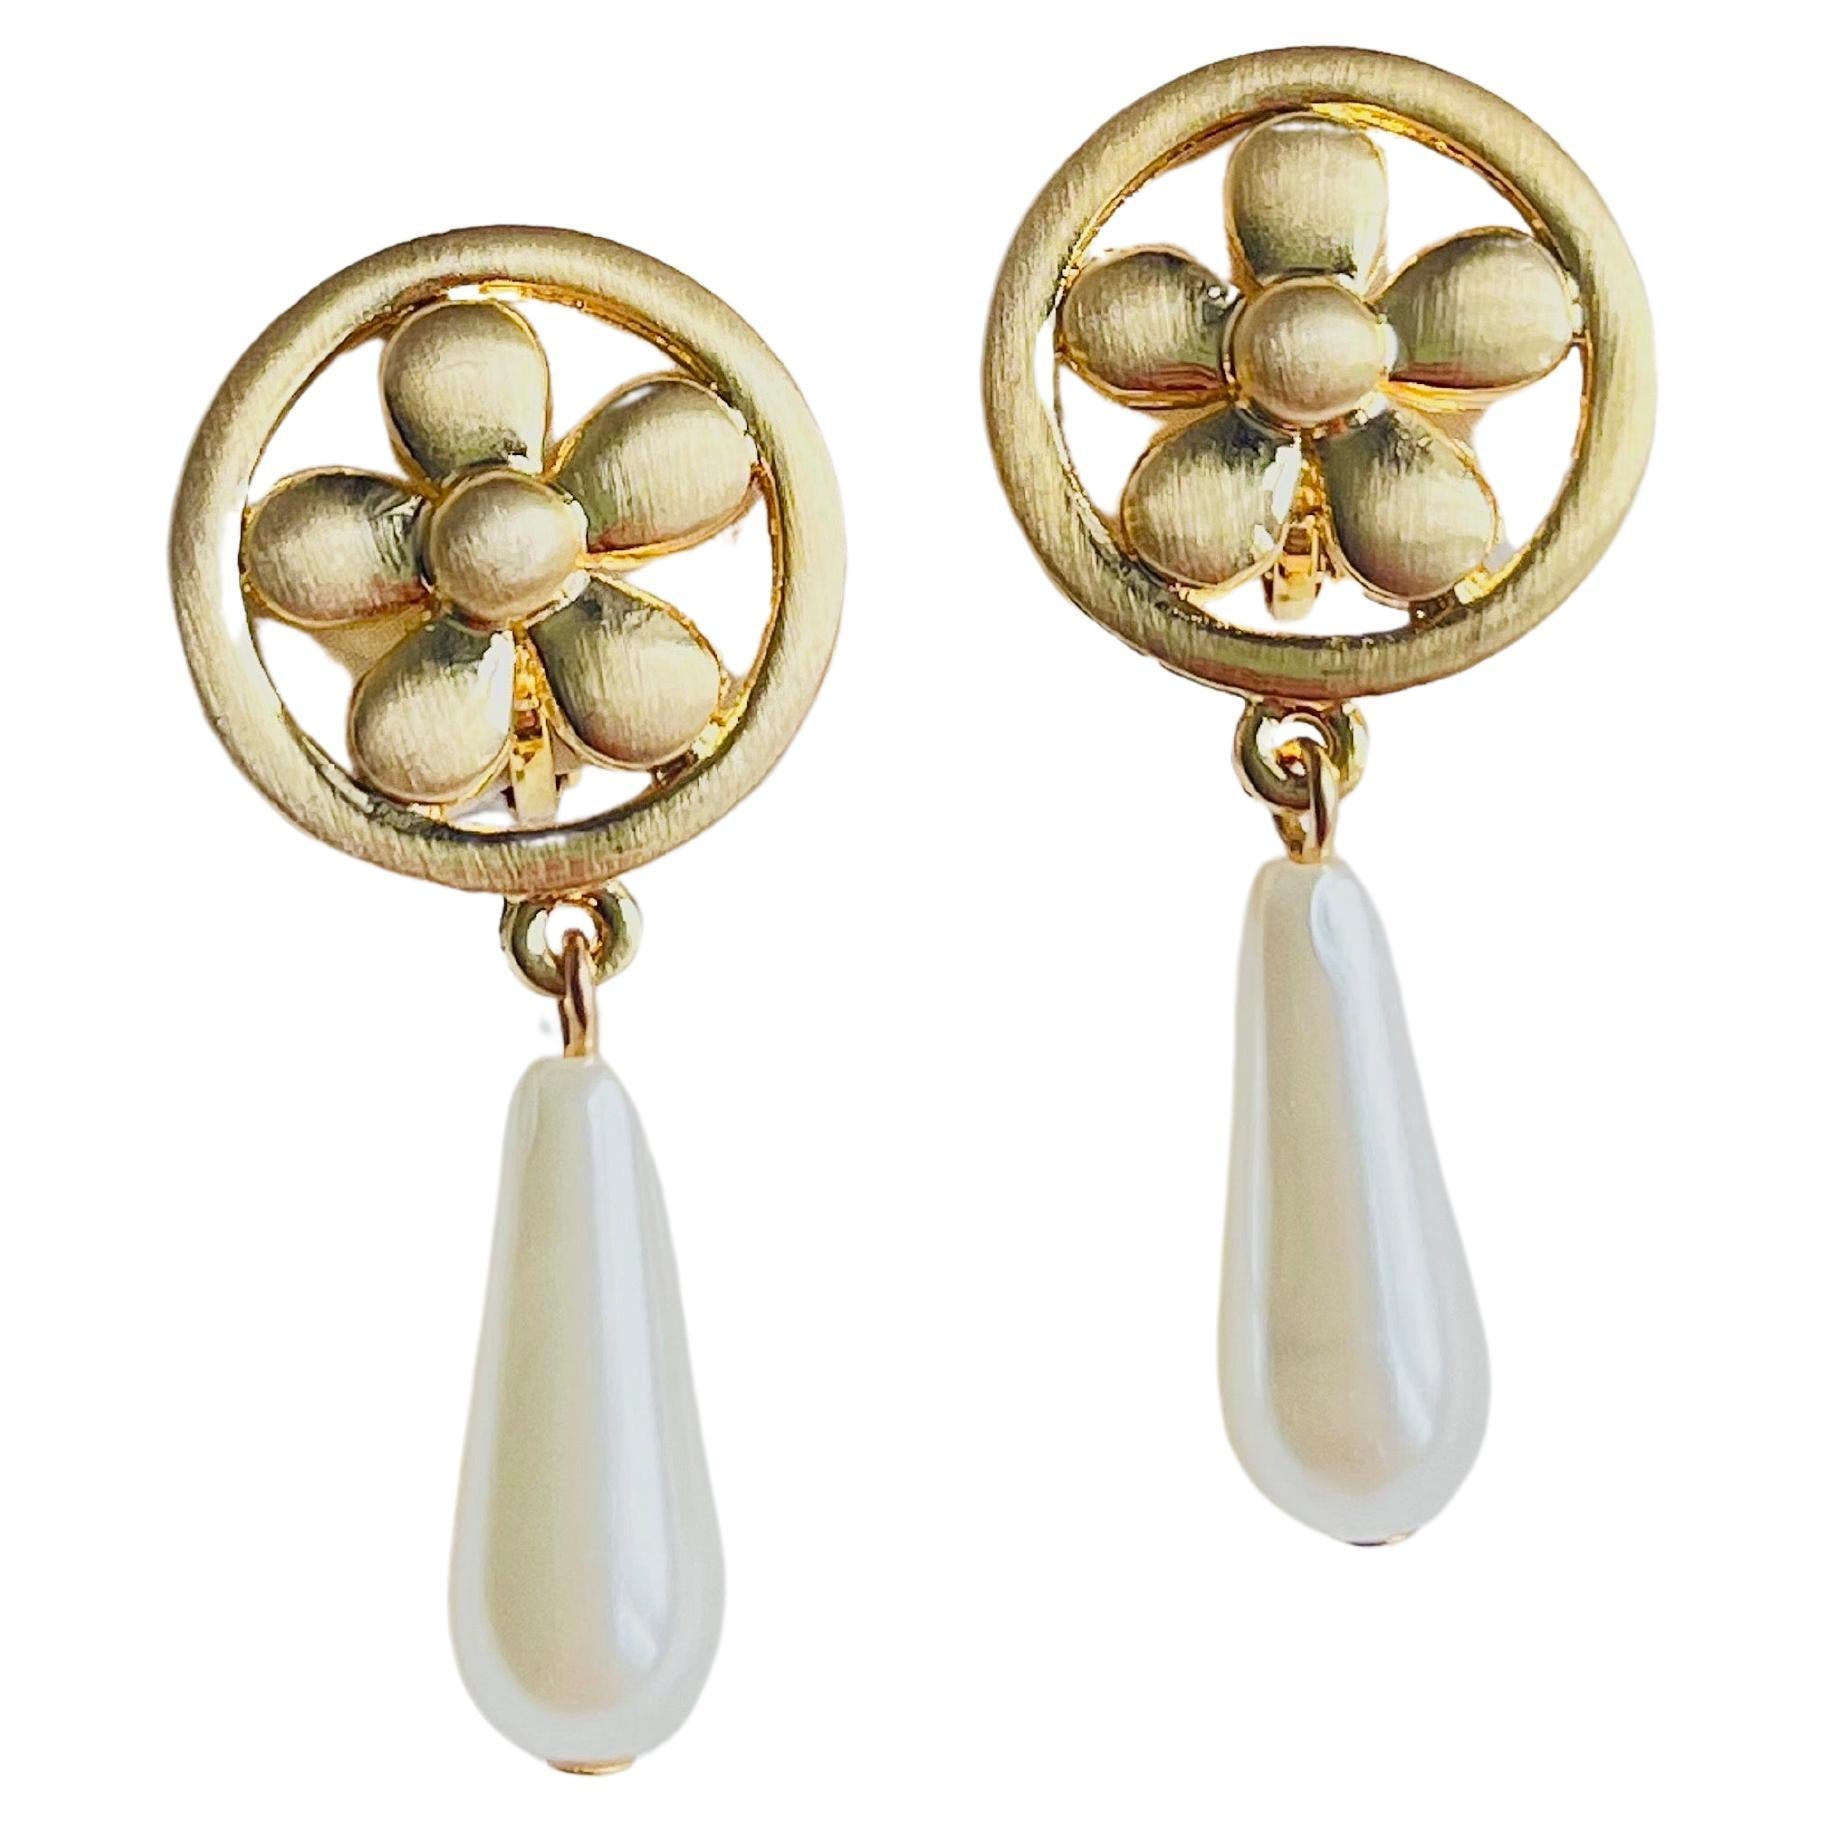 Flower Daisy Round Openwork Long Water Drop White Pearl Clip On Earrings, Gold Tone, Swarovski Element

100% handmade. Excellent gift for lady. High cost and quality.

Material: Faux pearls, Gold plated metal.

Size: 4.5*1.9 cm.

Weight: 5 g/each.
_